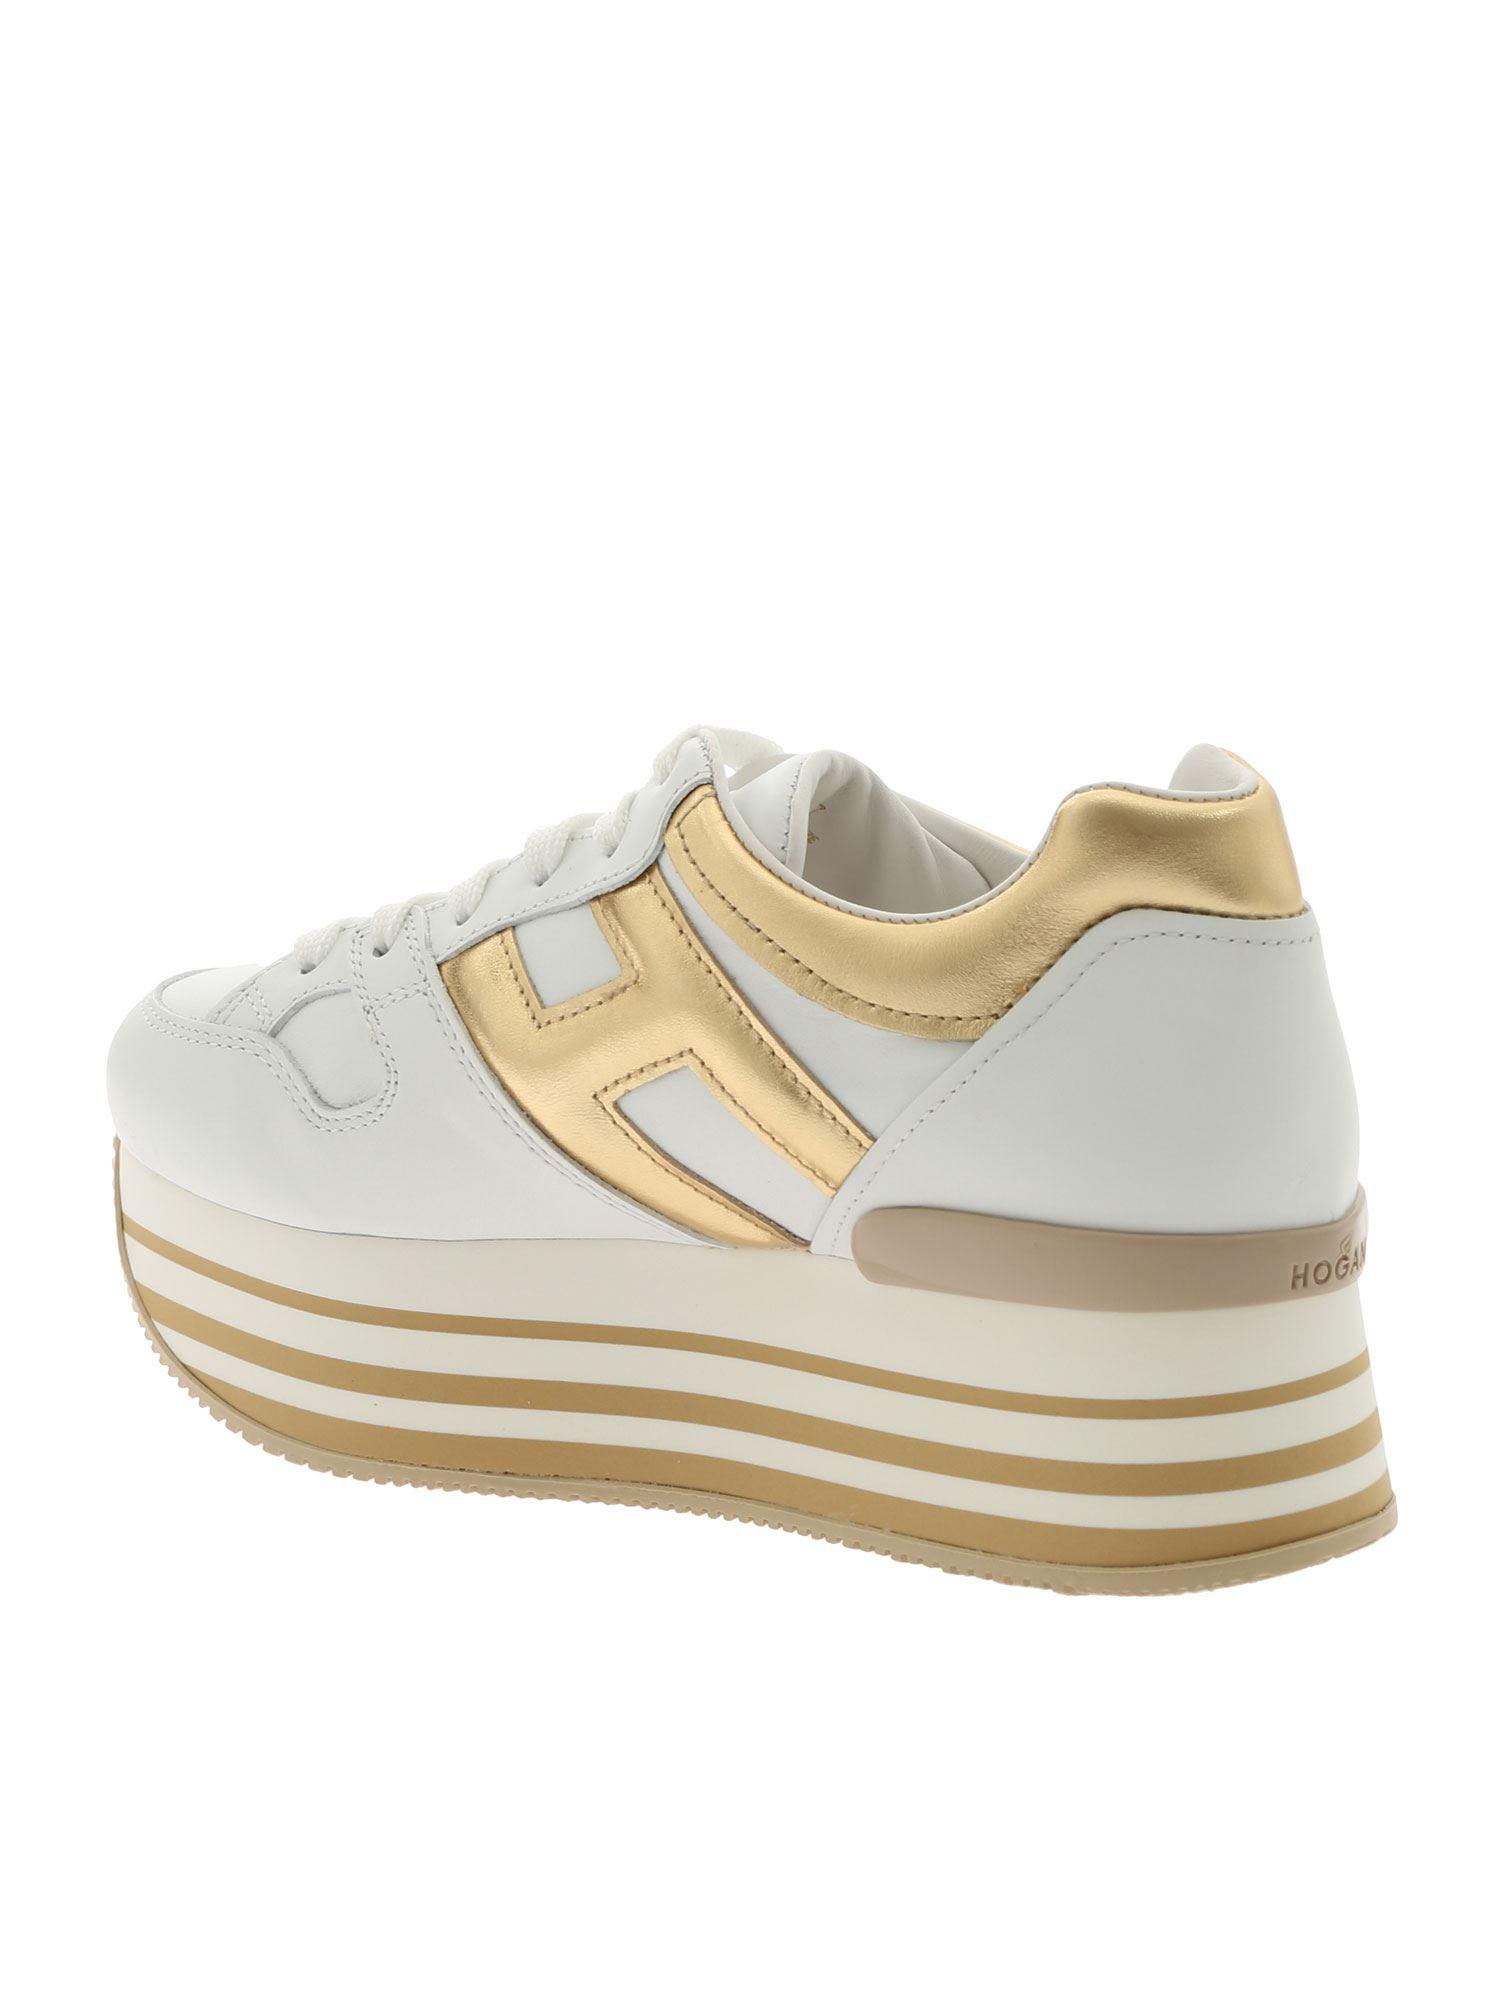 Hogan Leather H283 White And Golden Sneakers - Lyst